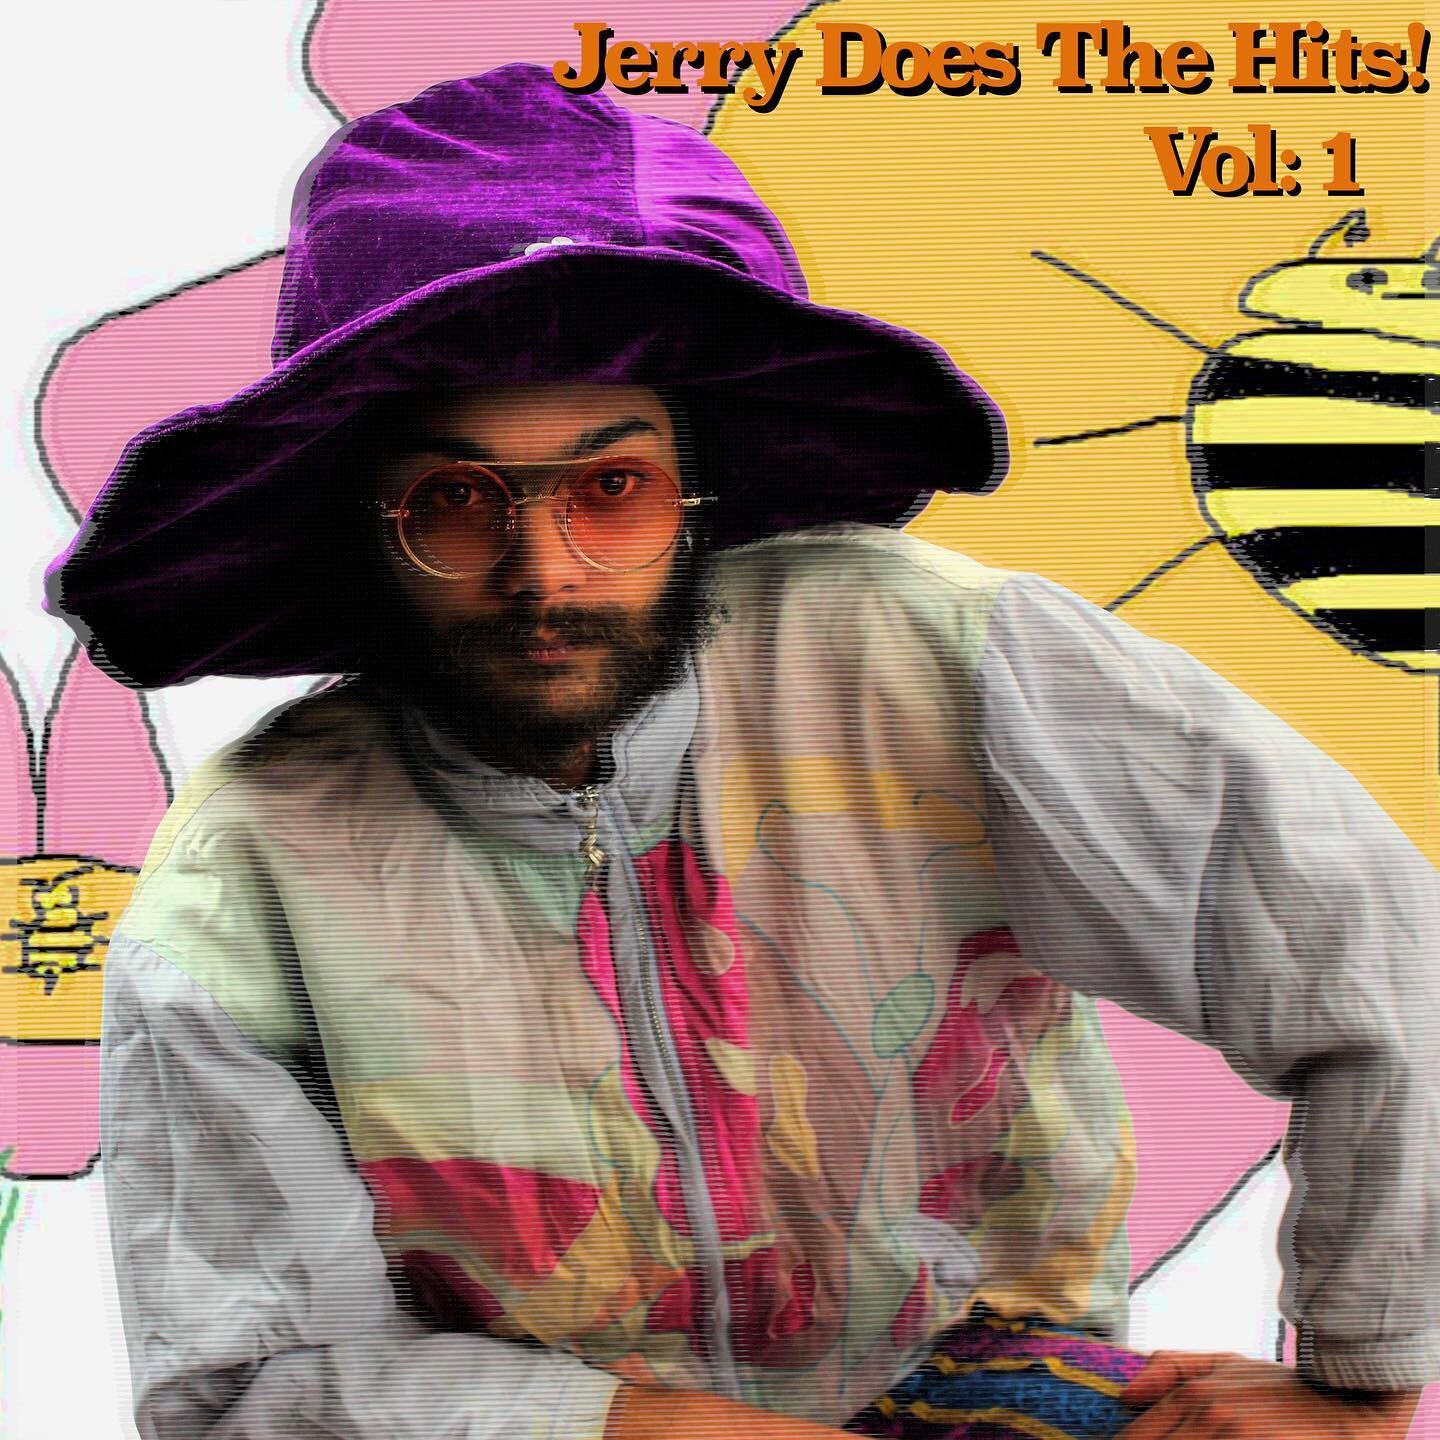 Jerry Does the Hits! Part:1 is here in full force!! Including covers of @bandofhorses @sushitrash @anmlcollective and @mountainswallower also featuring a guest appearance by @thesystem_official 🎻 
Check it out anywhere you enjoy music! (Link in bio)